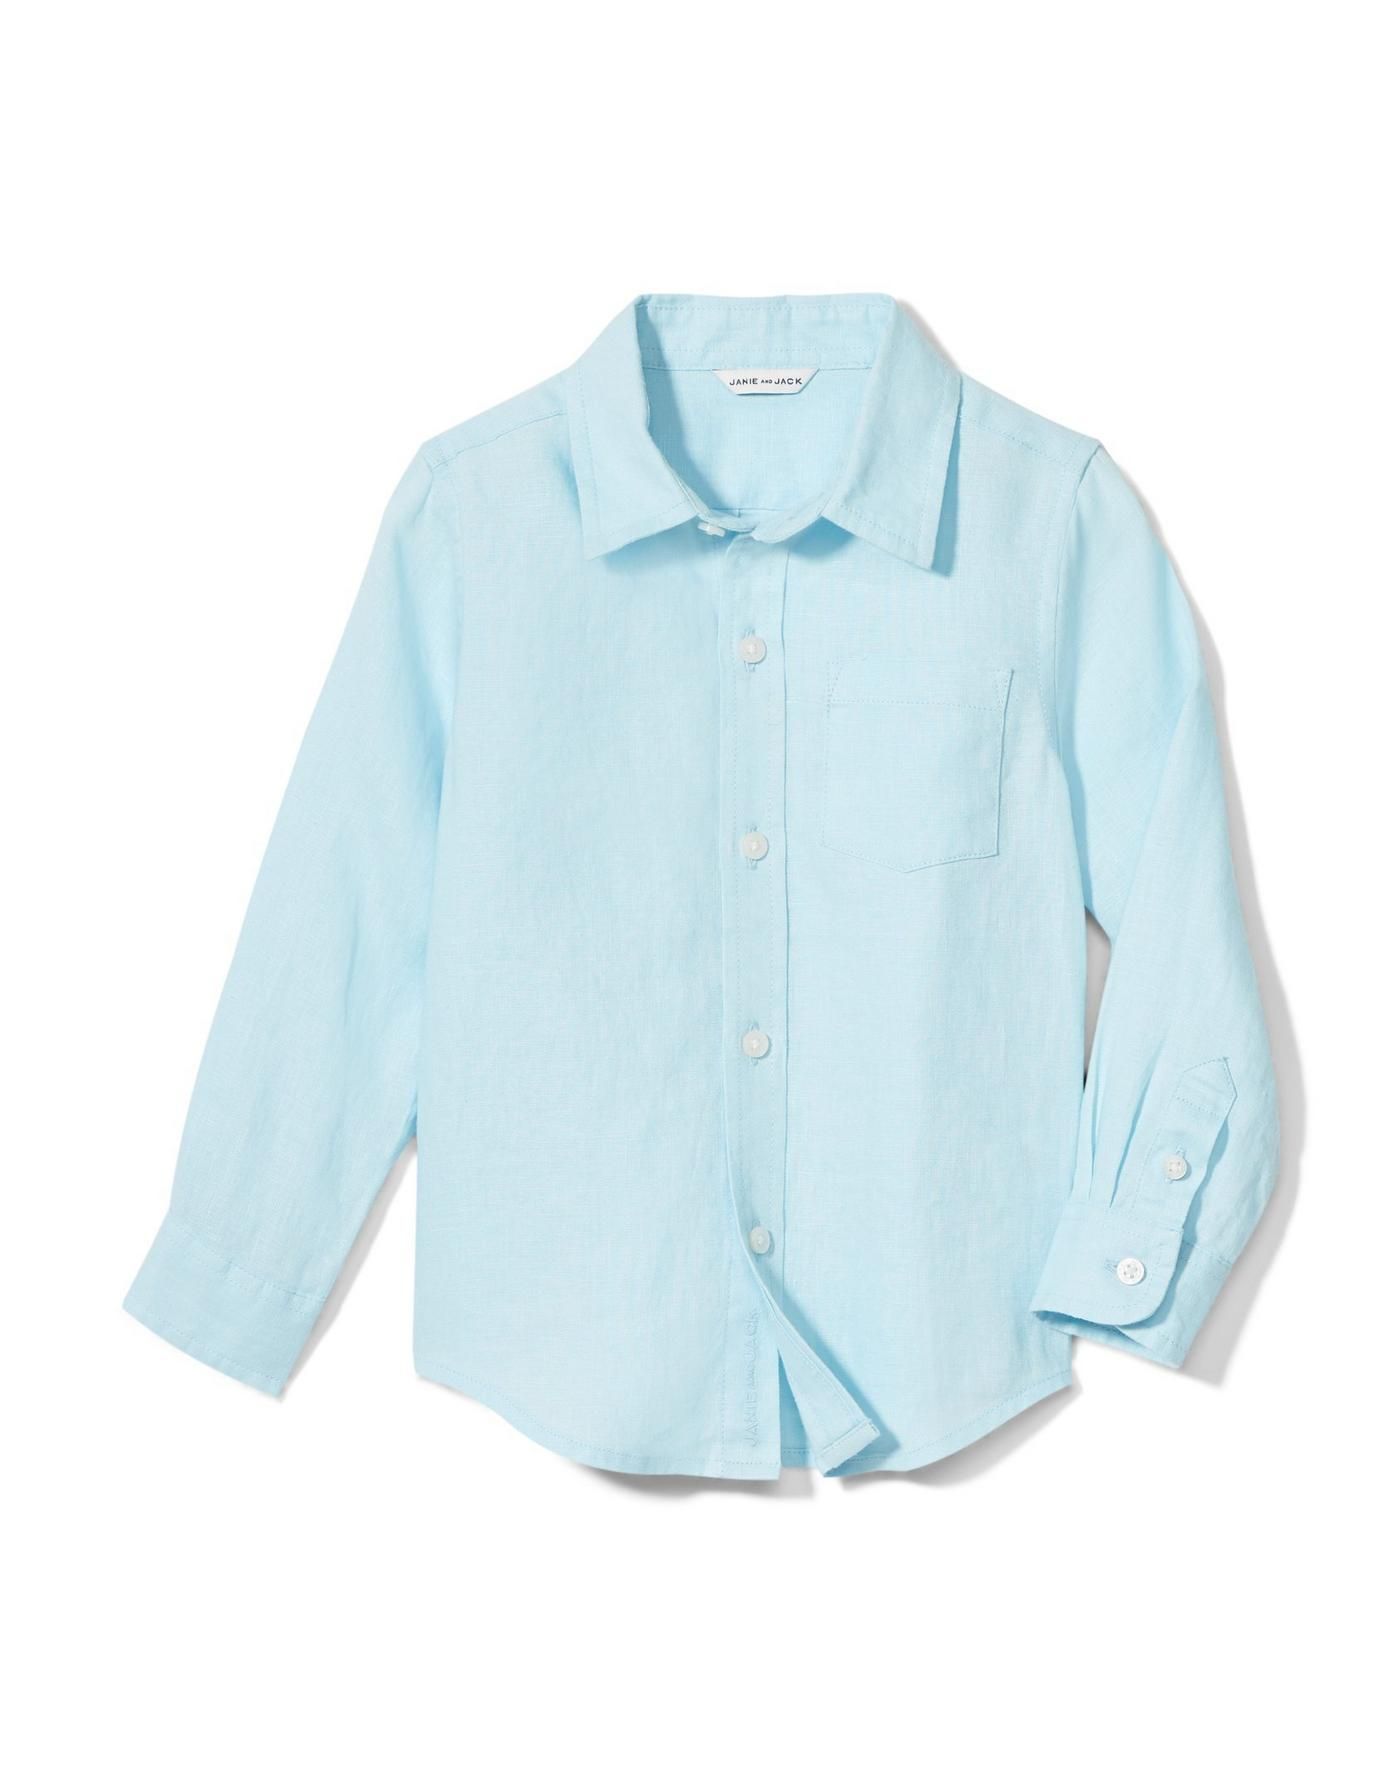 Linen Shirt | Janie and Jack